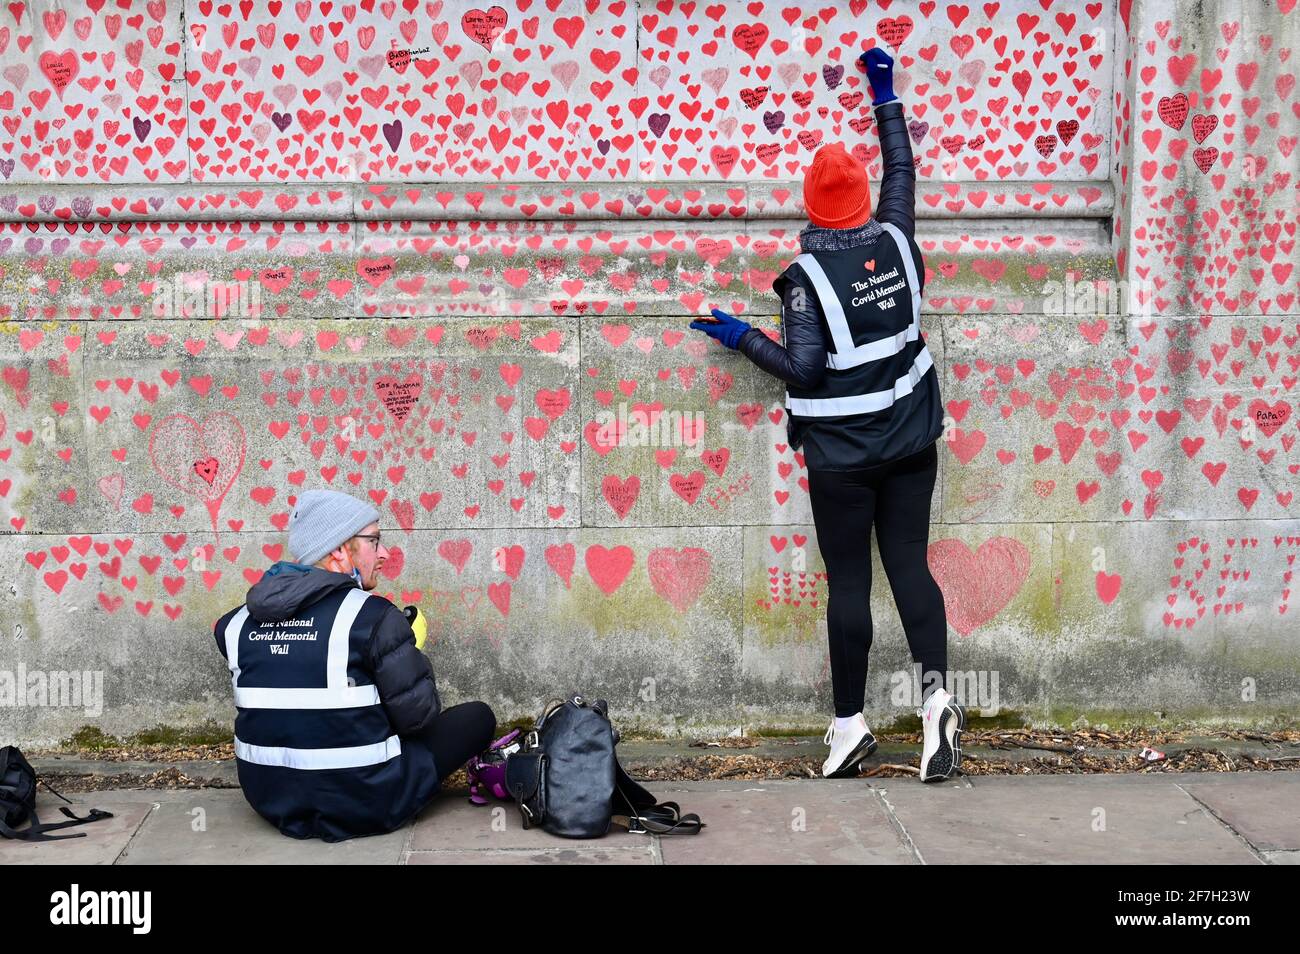 The National Covid Memorial Wall, Around 130,000 hearts have been painted on a kilometre long section of wall opposite the Houses of Parliament as a memorial to the loved ones who have died during the Coronavirus Pandemic. St Thomas' Hospital, Westminster, London. UK Stock Photo